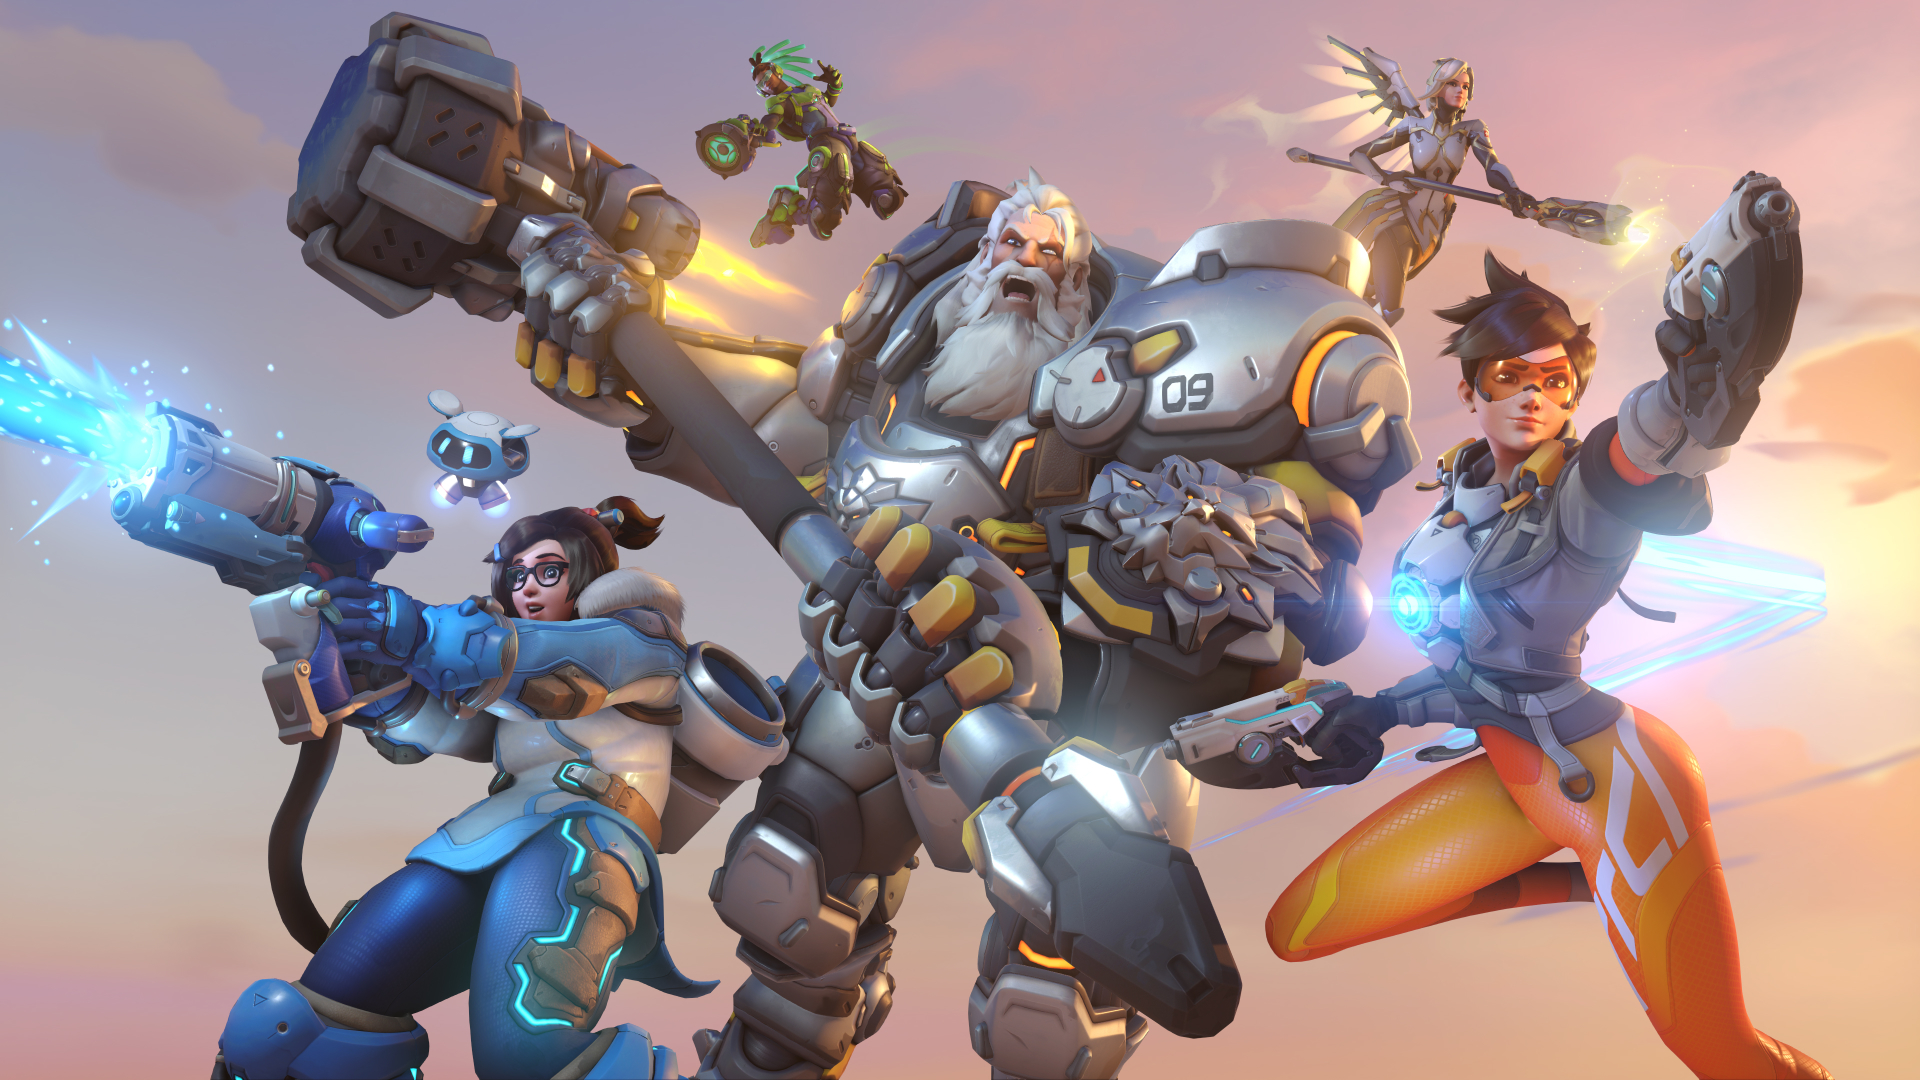 Second Overwatch 2 beta on the way with new content expected – is Junker Queen coming?